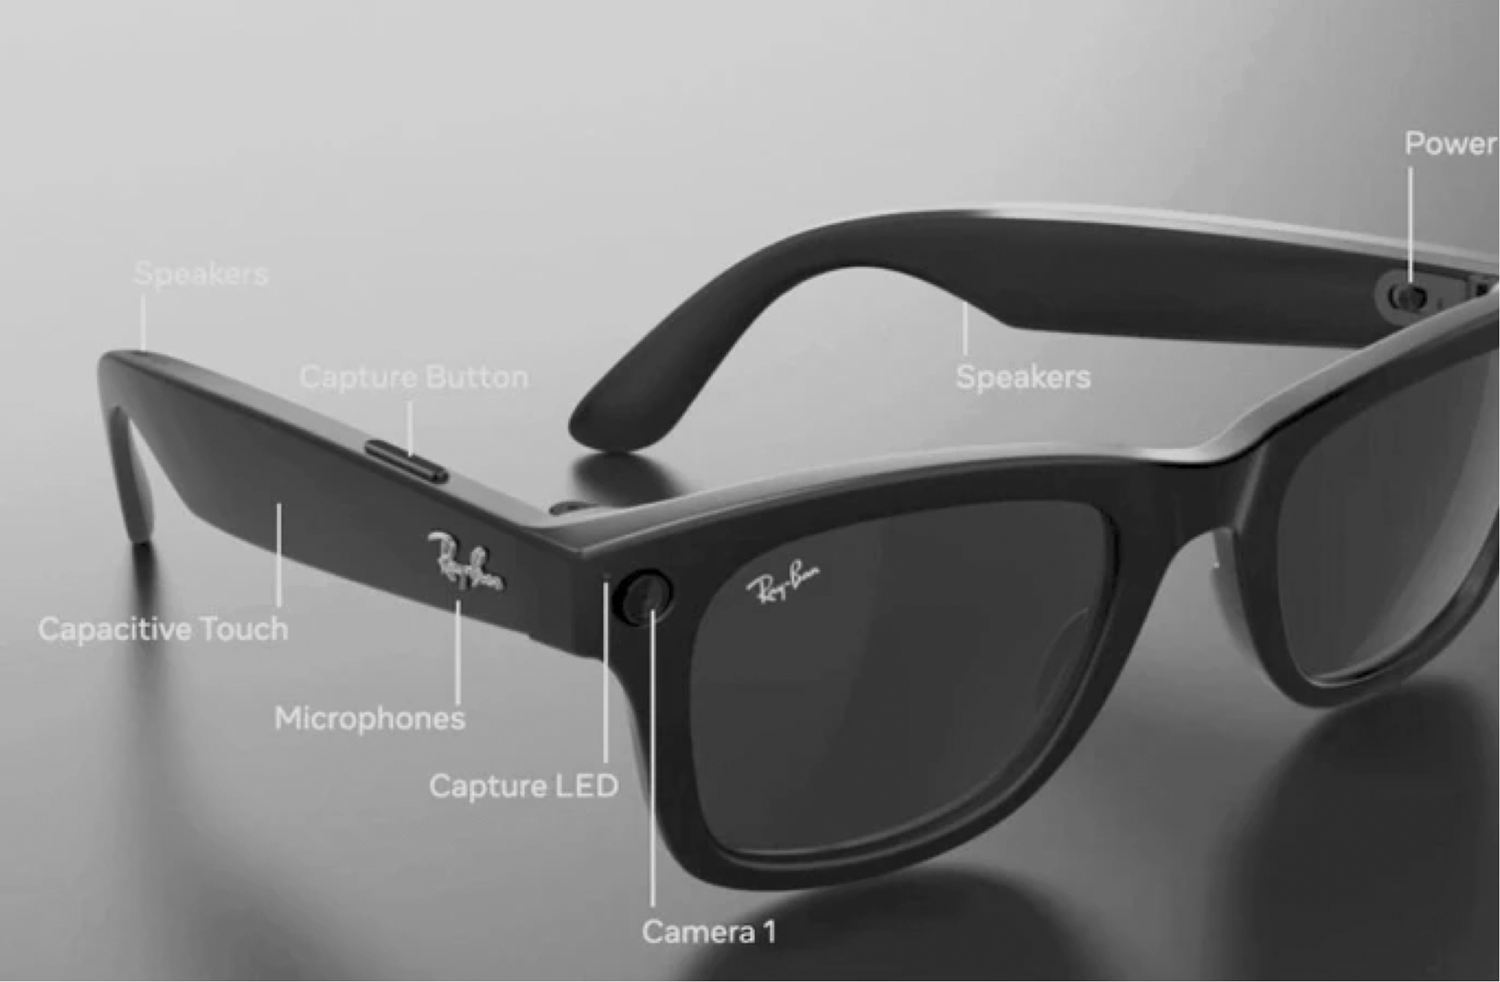 META AR GLASSES: Everything We Know About the AI-Powered AR Smart Glasses of the Future